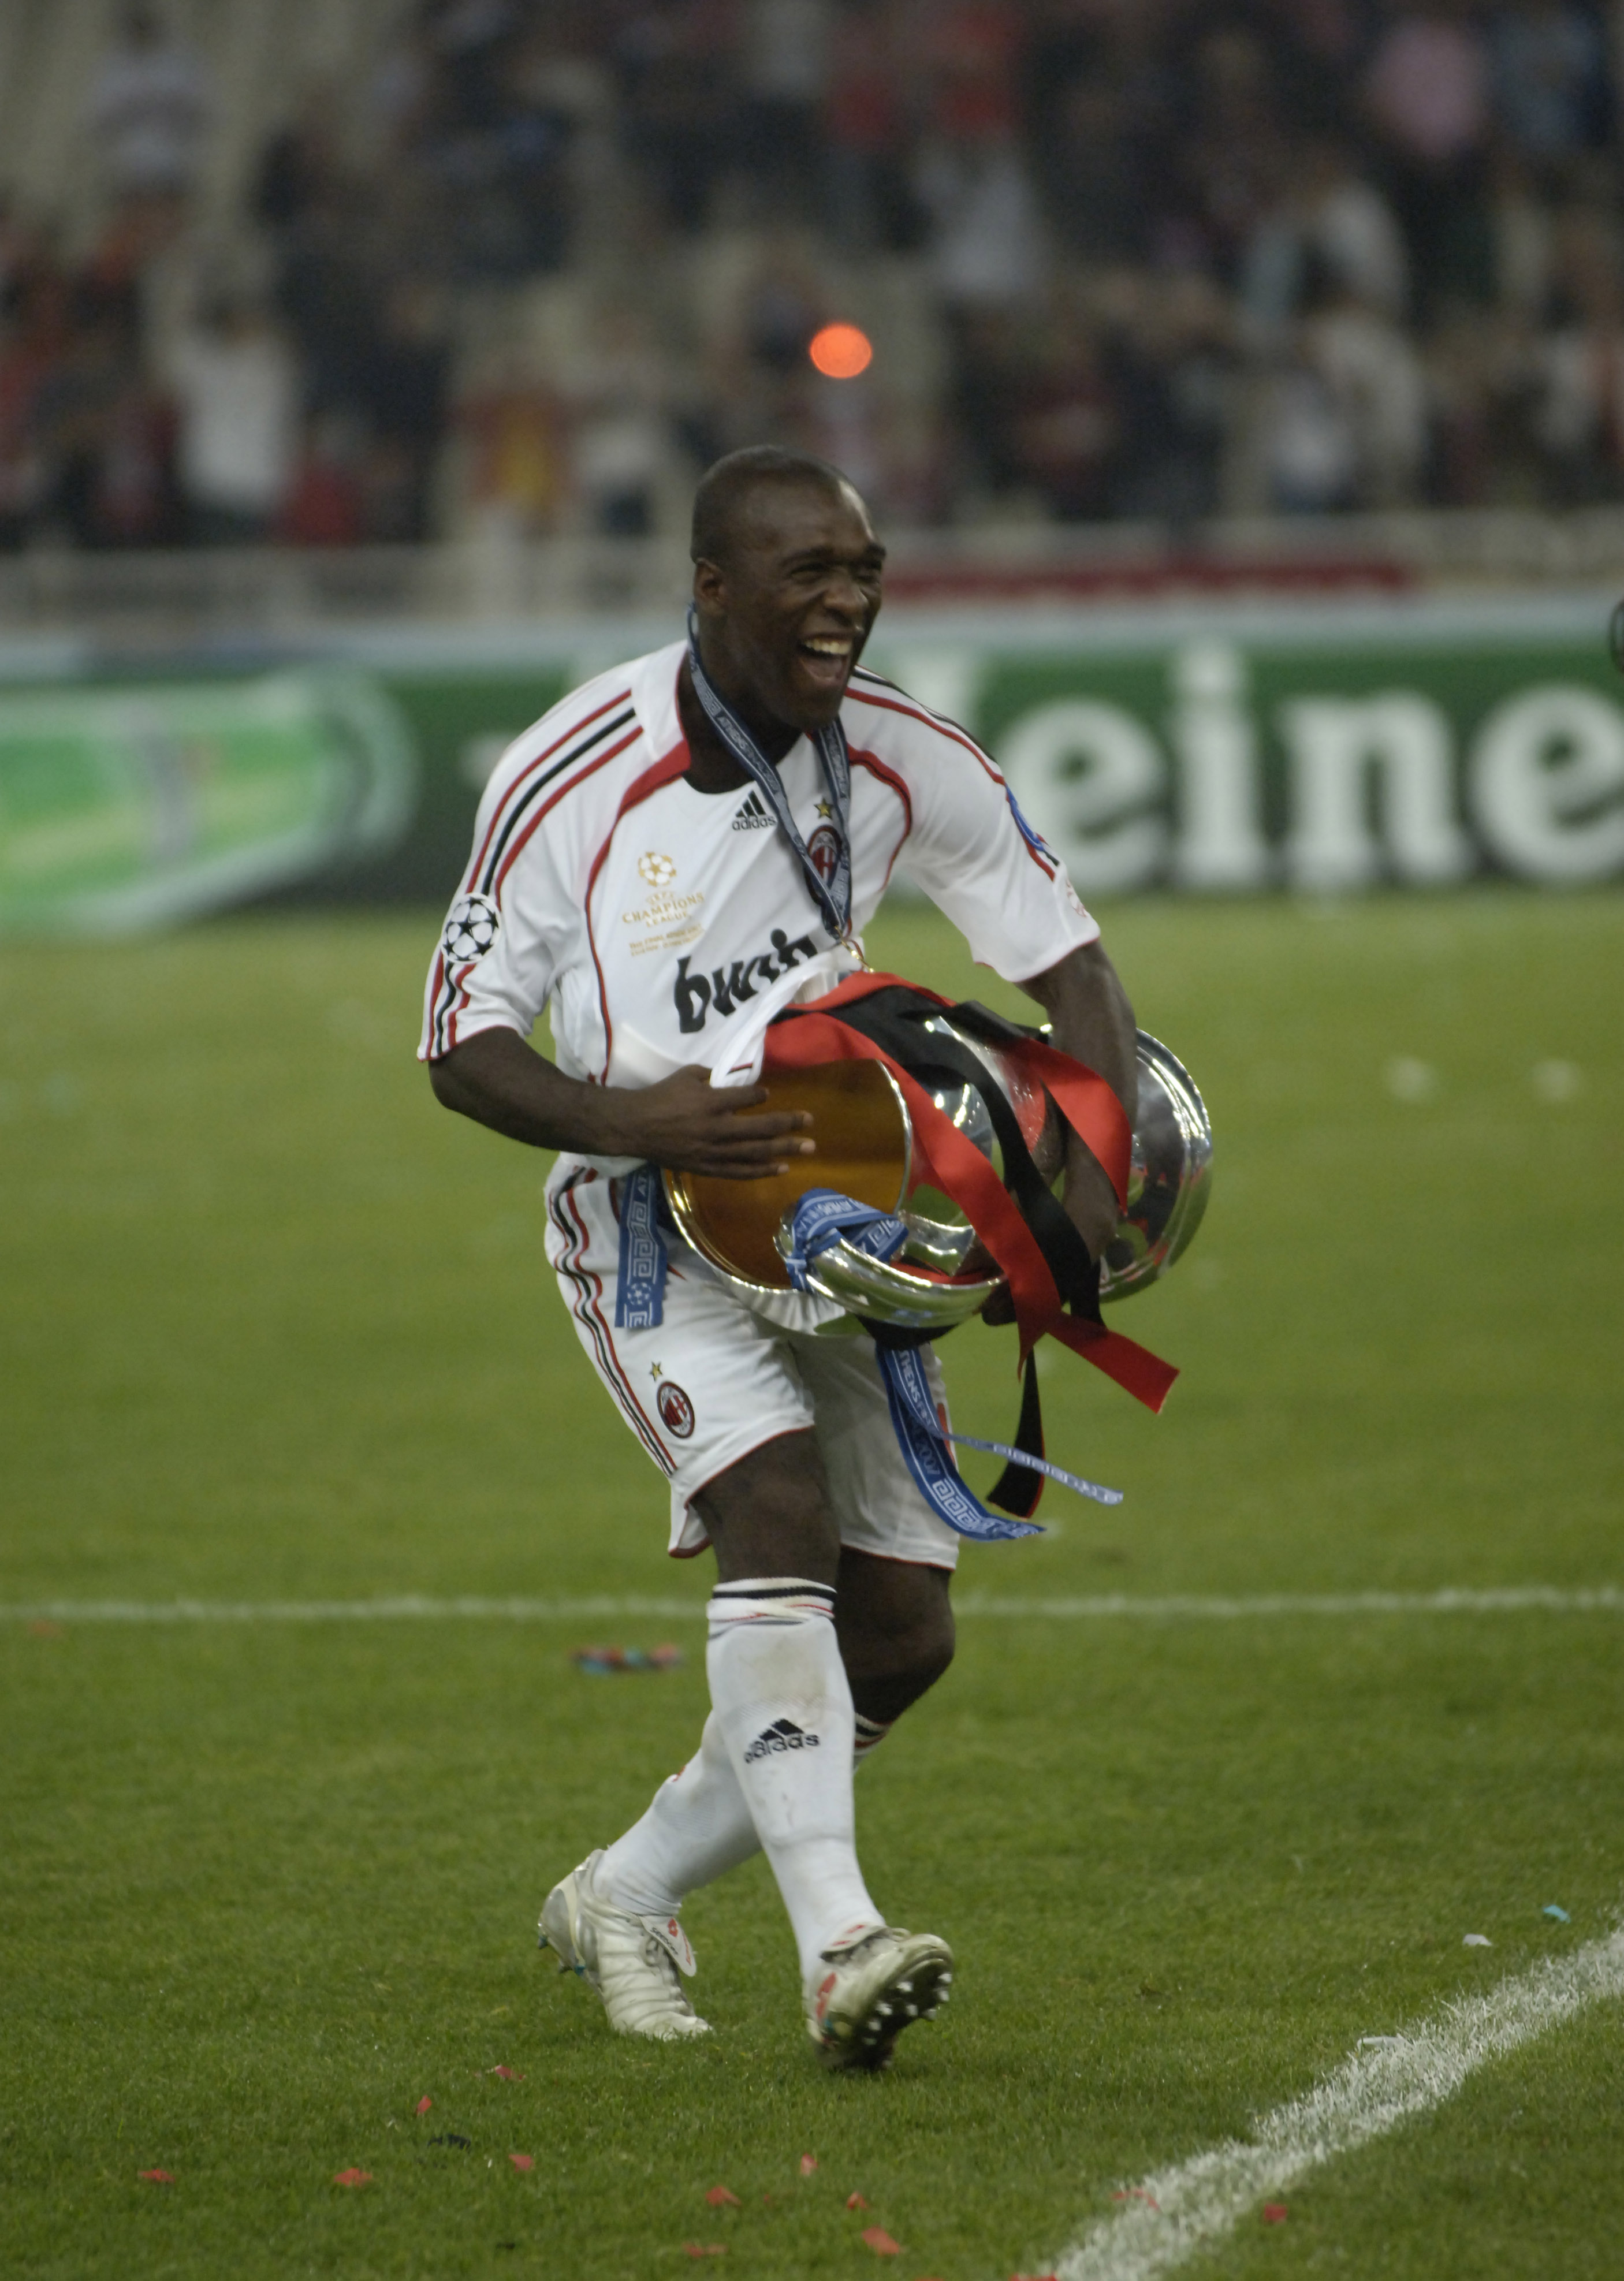 BT Sport. Football. UEFA Champions League Final. Athens. 23rd May 2007. AC Milan 2 v Liverpool 1. AC Milan's Clarence Seedorf celebrates with the trophy.